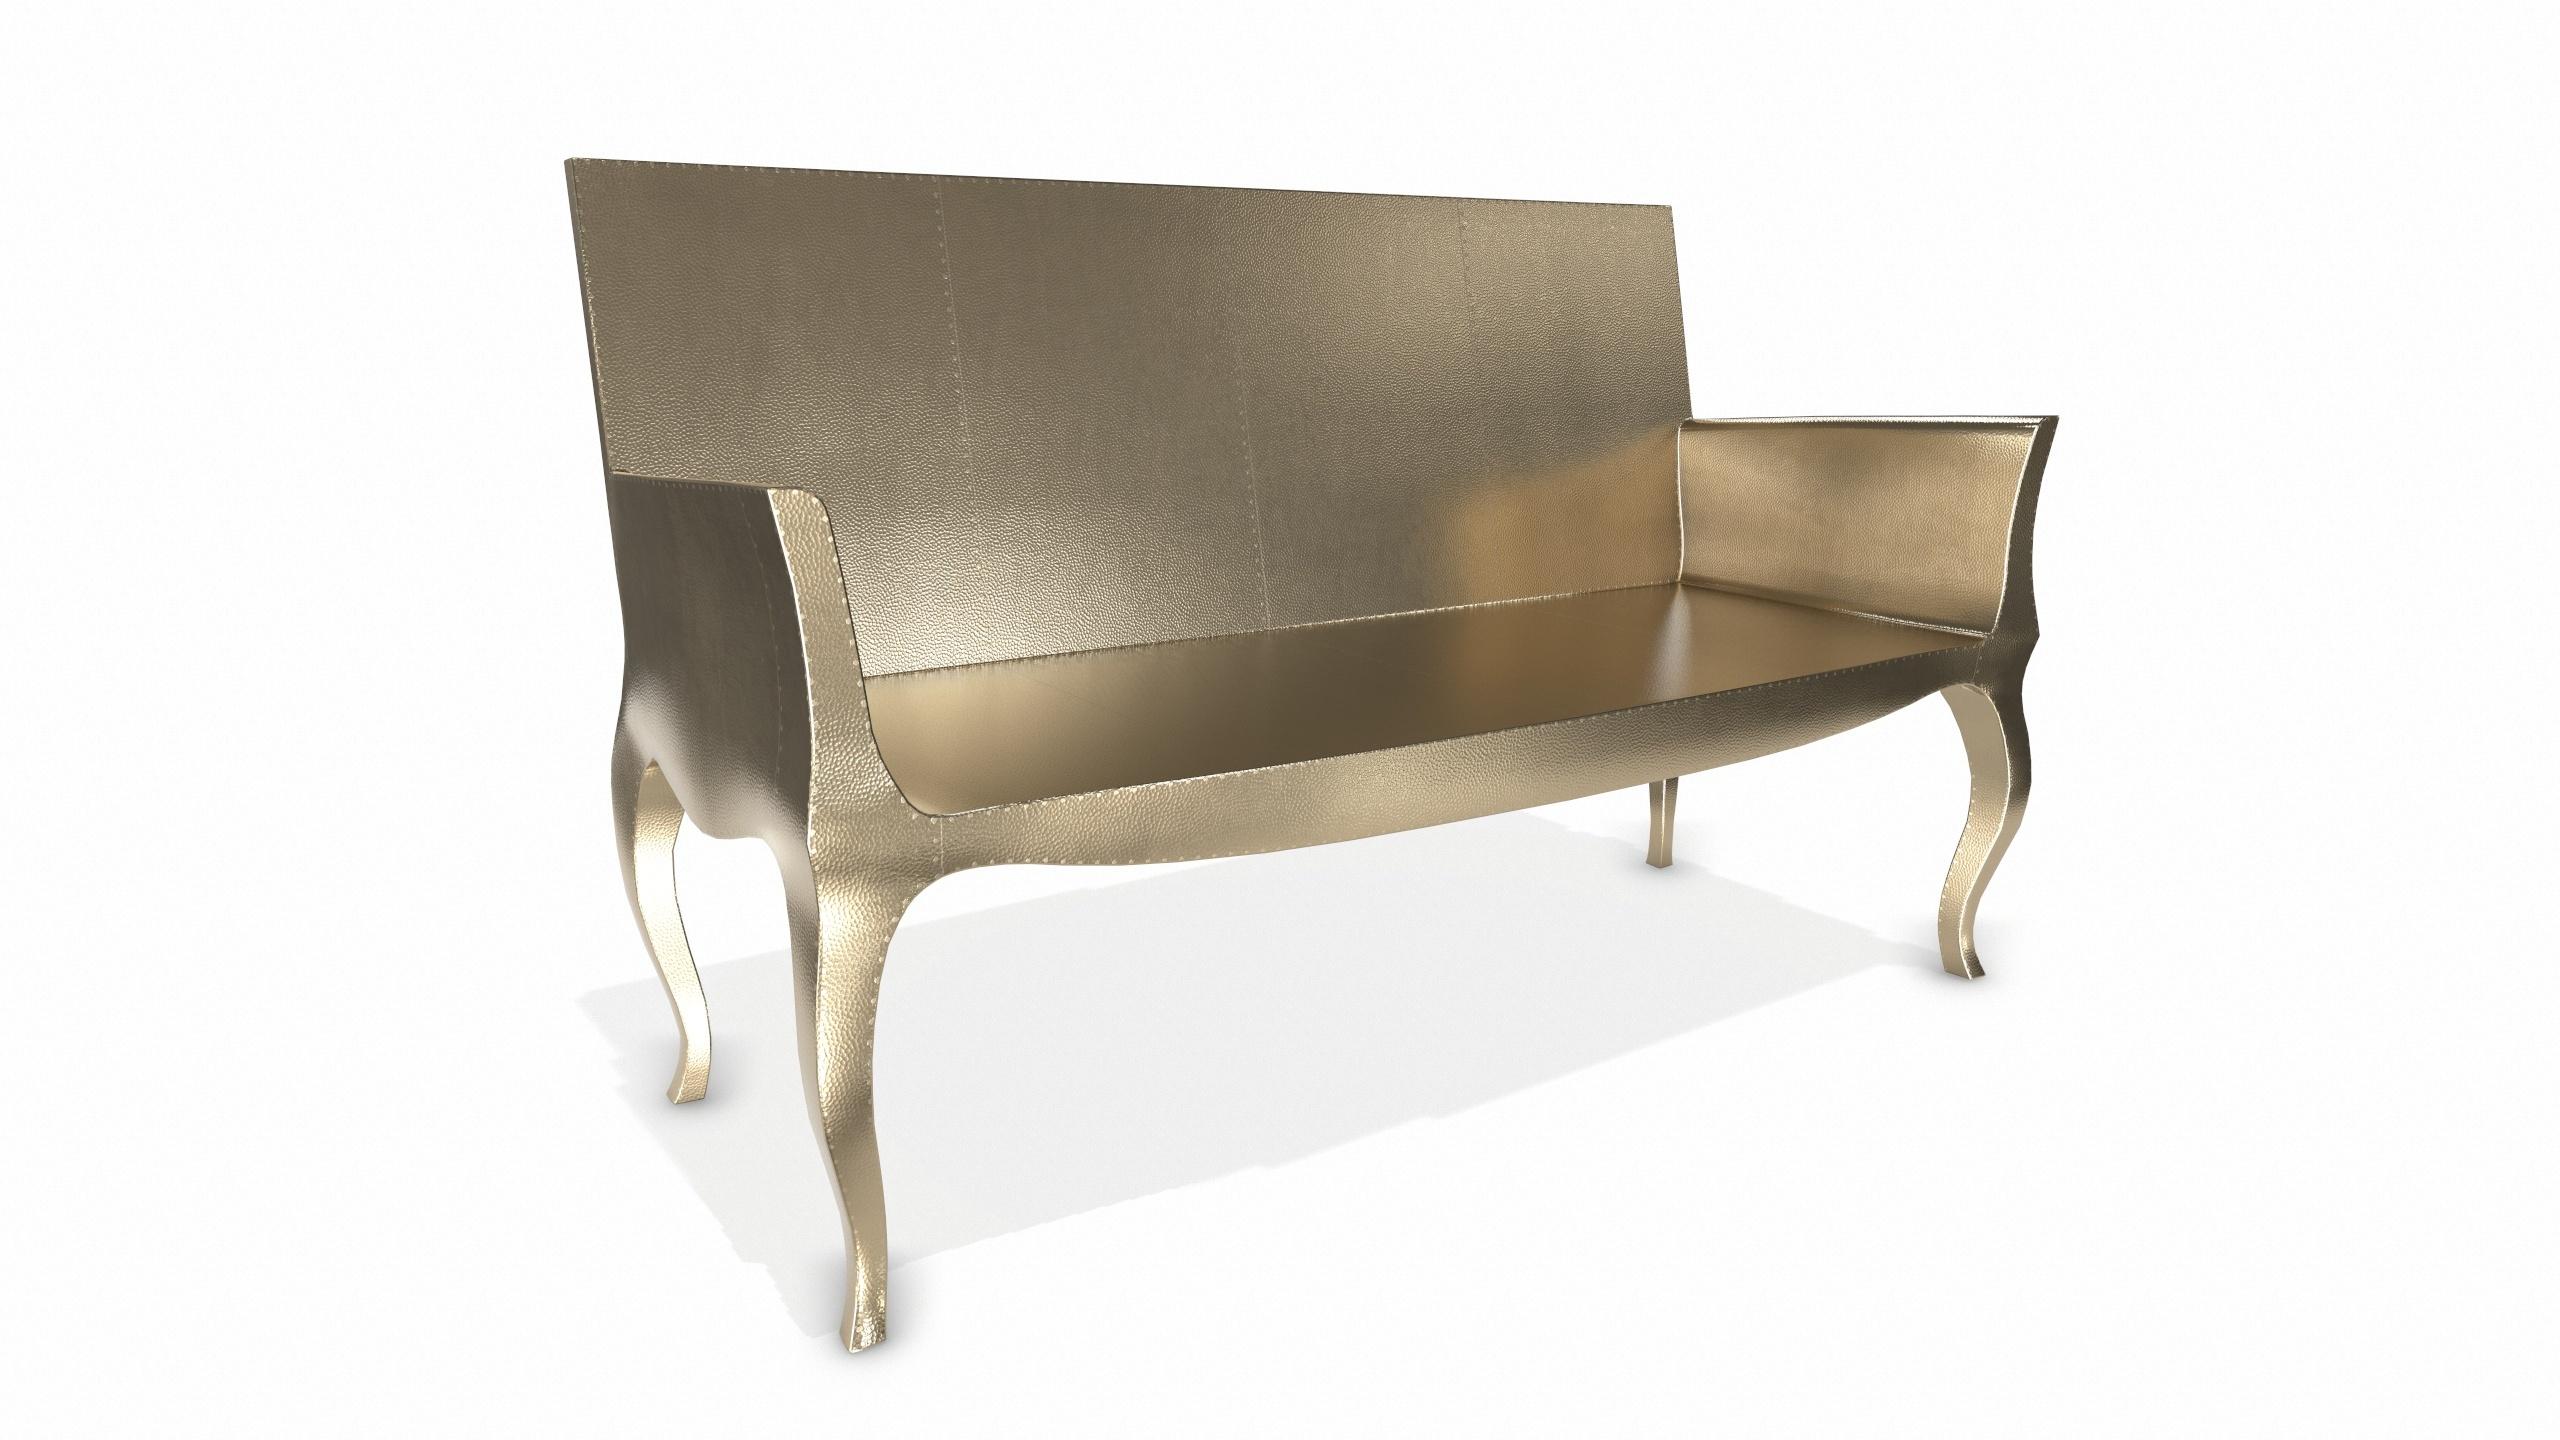 Contemporary Louise Settee Art Deco Benches in Mid. Hammered Brass by Paul Mathieu For Sale